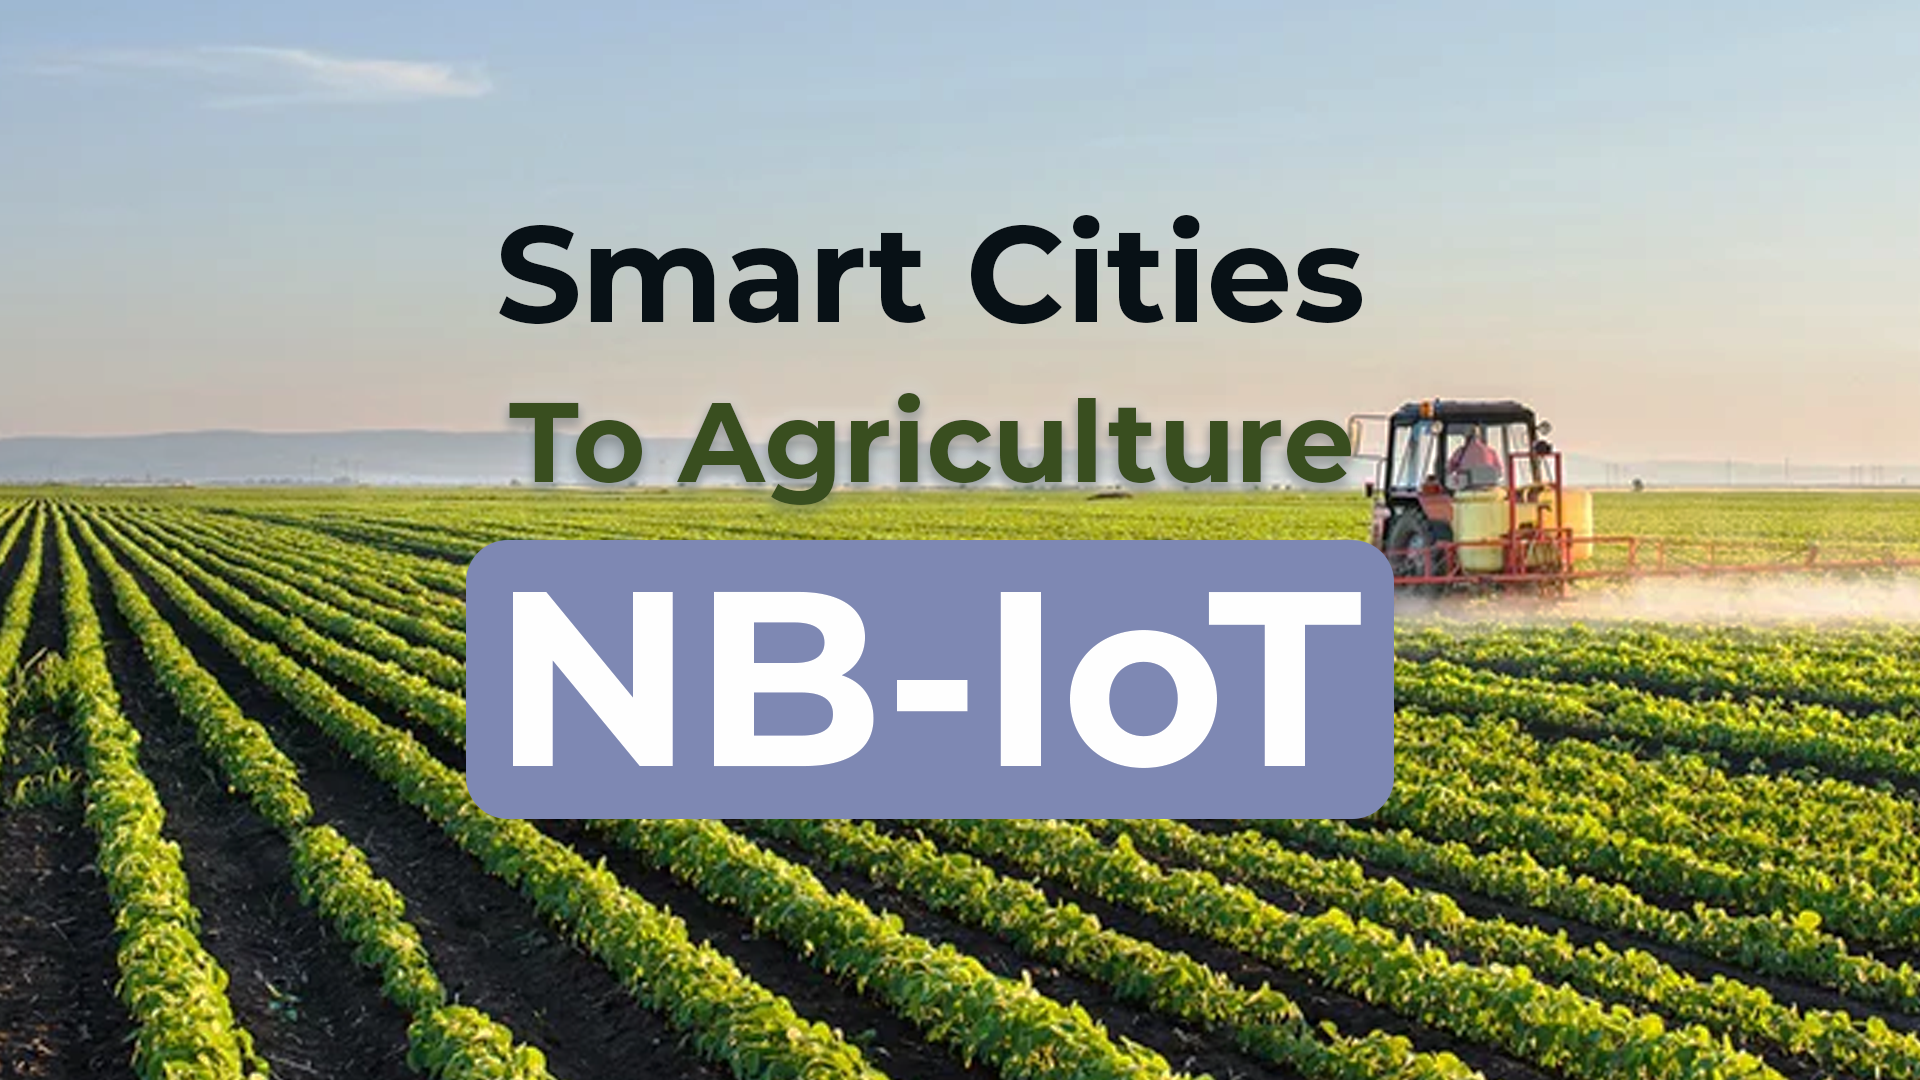 Narrowband IoT (NB-IoT) is Transforming Industries From Smart Cities to Agriculture